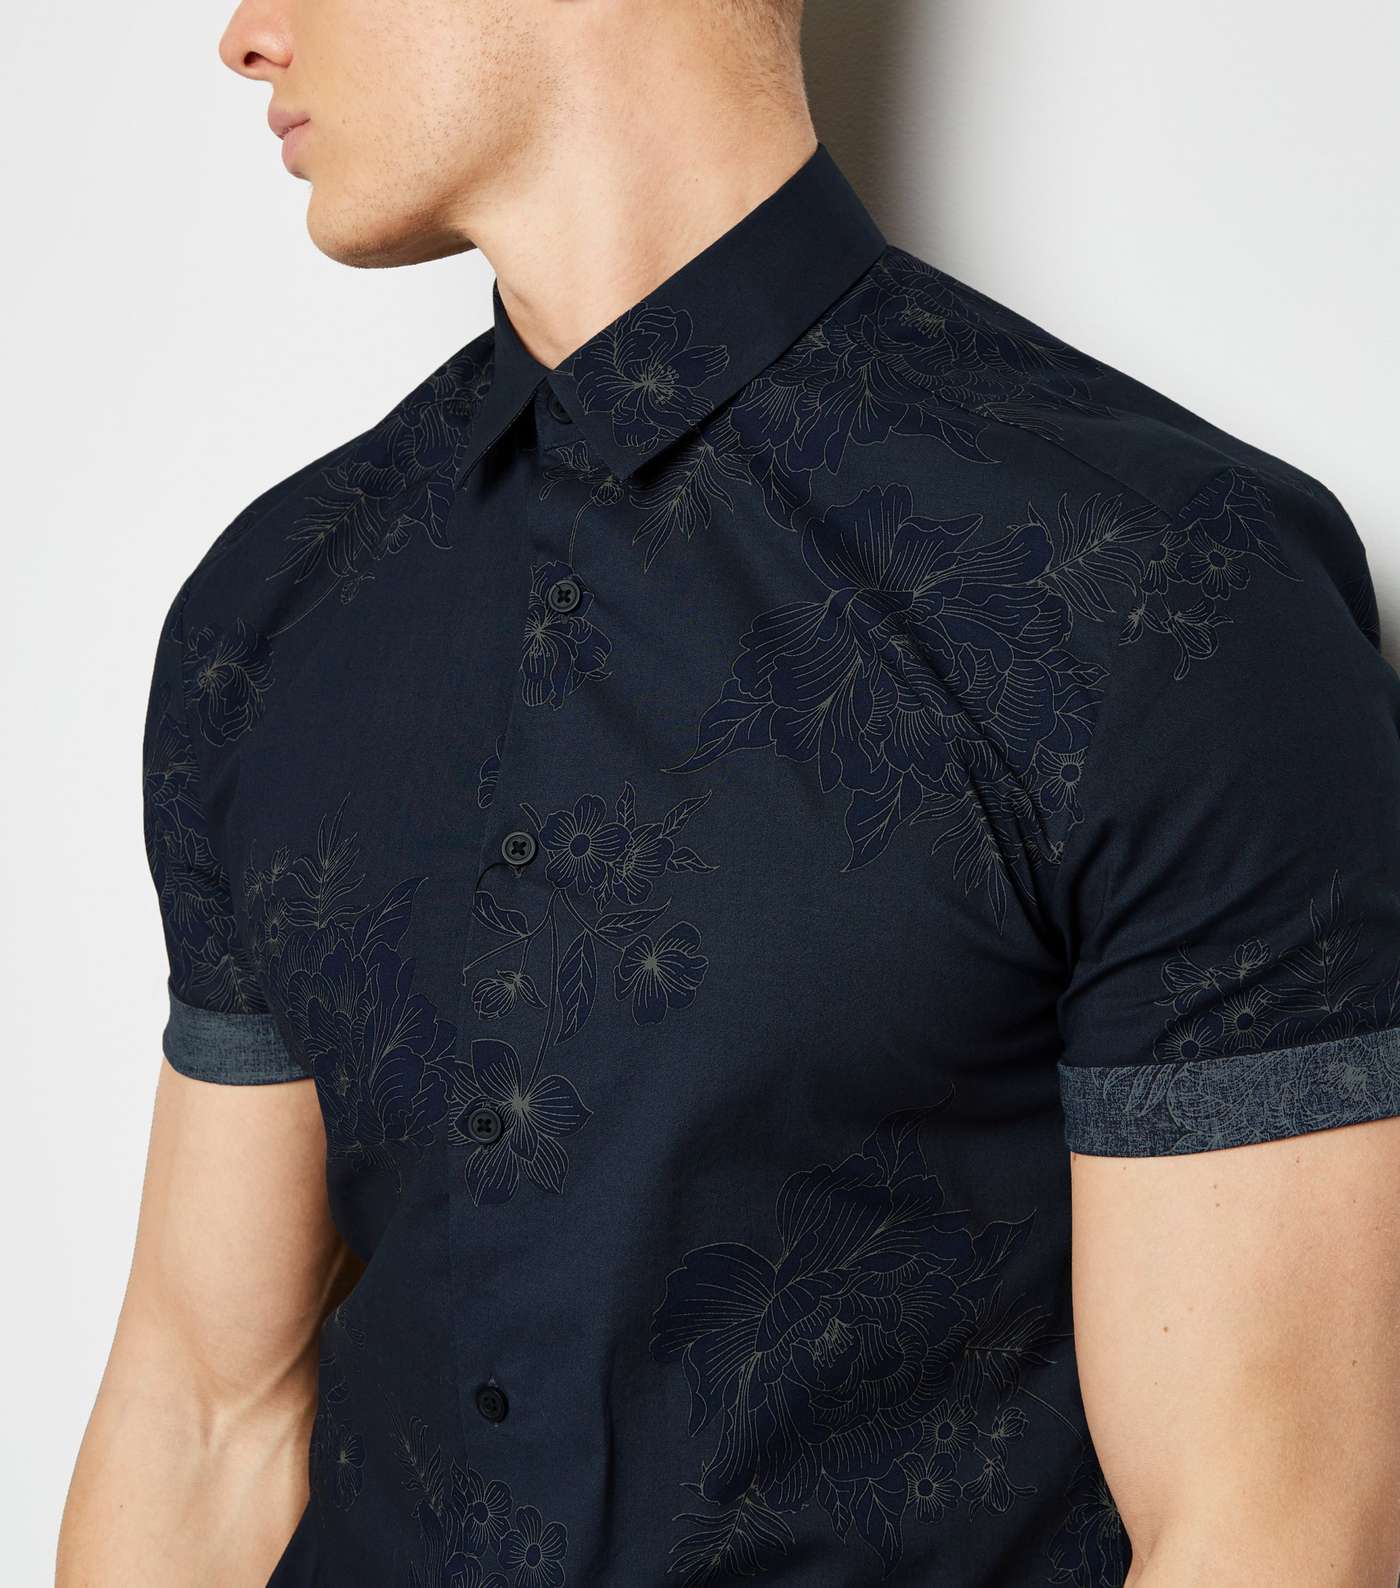 Grey Floral Muscle Fit Shirt Image 5